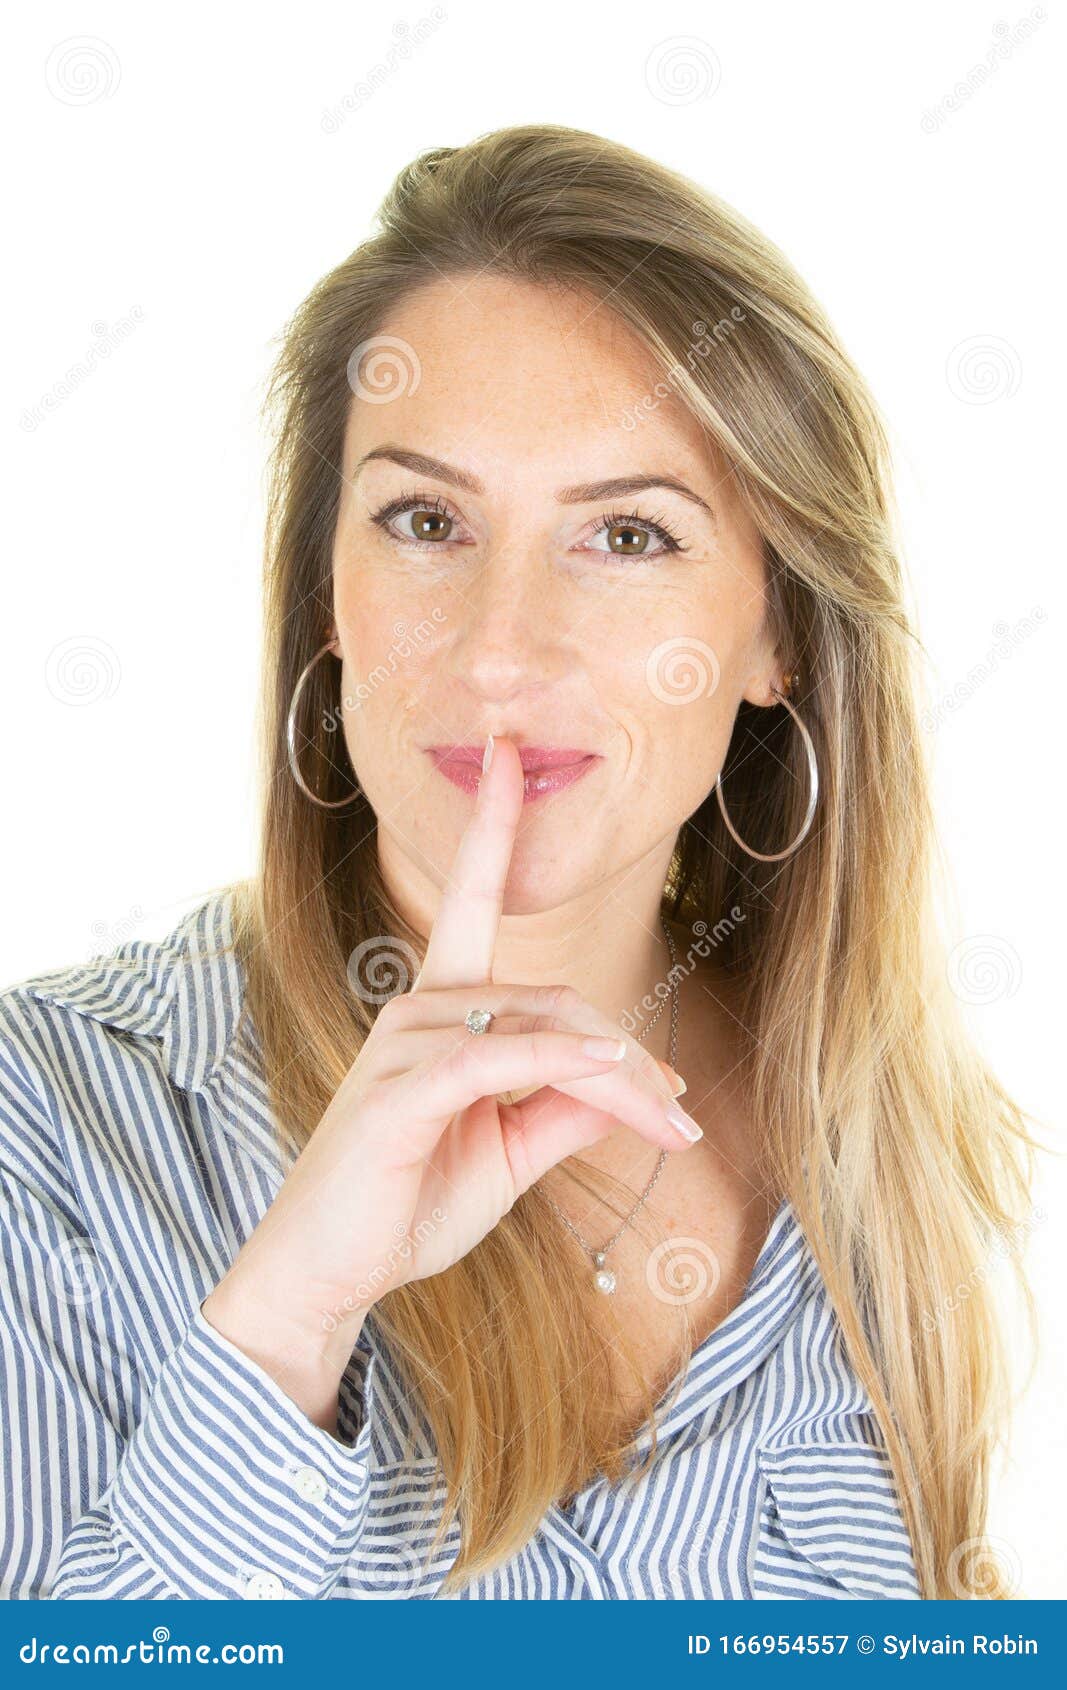 Shh Portrait Of Pretty Sensual Attractive Blond Woman Holding Index Finger On Lips Saying Shush